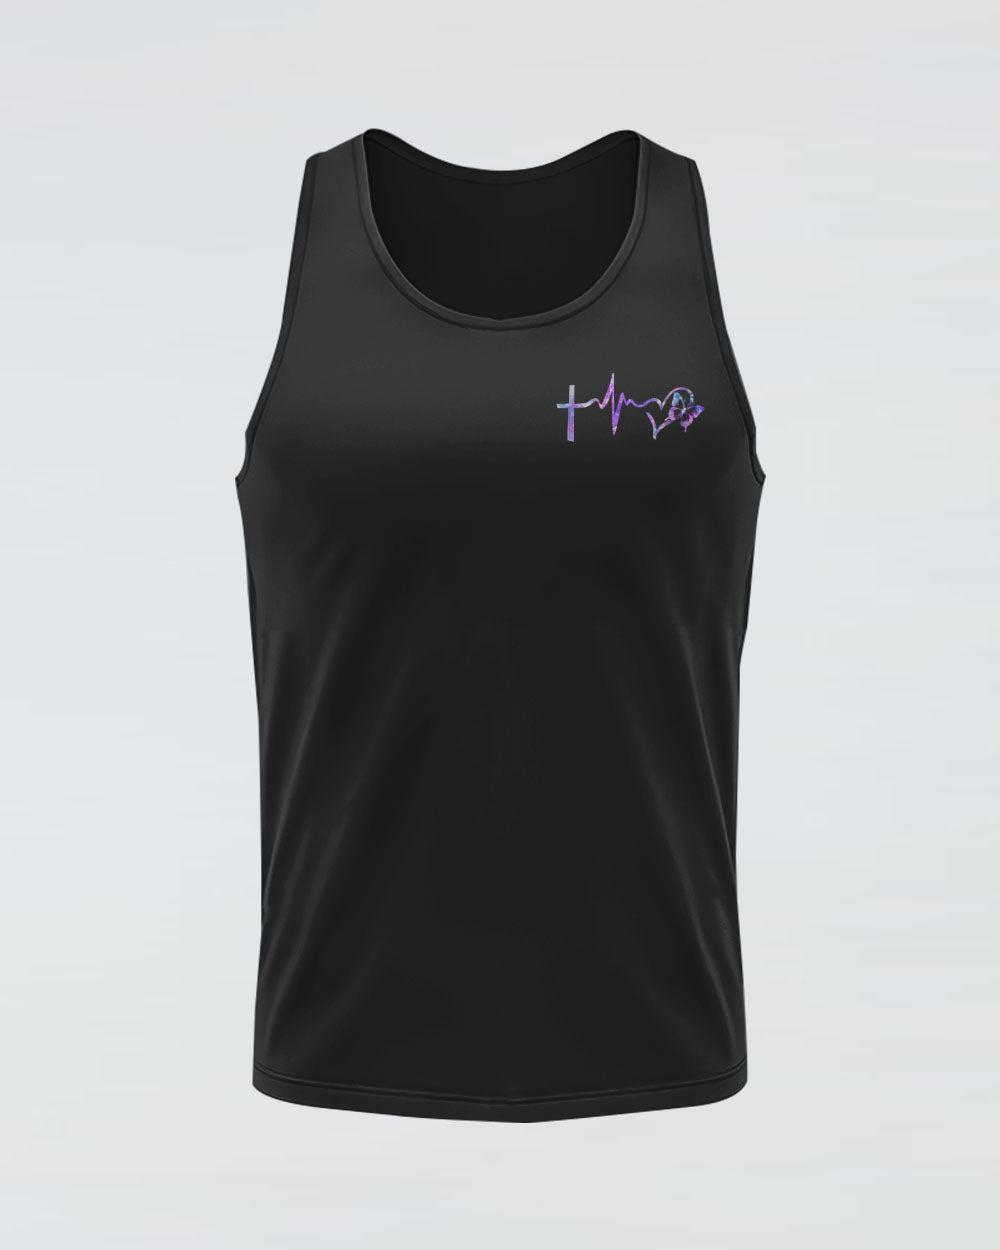 The Moment Your Heart Stopped Mine Changed Forever Women's Christian Tanks